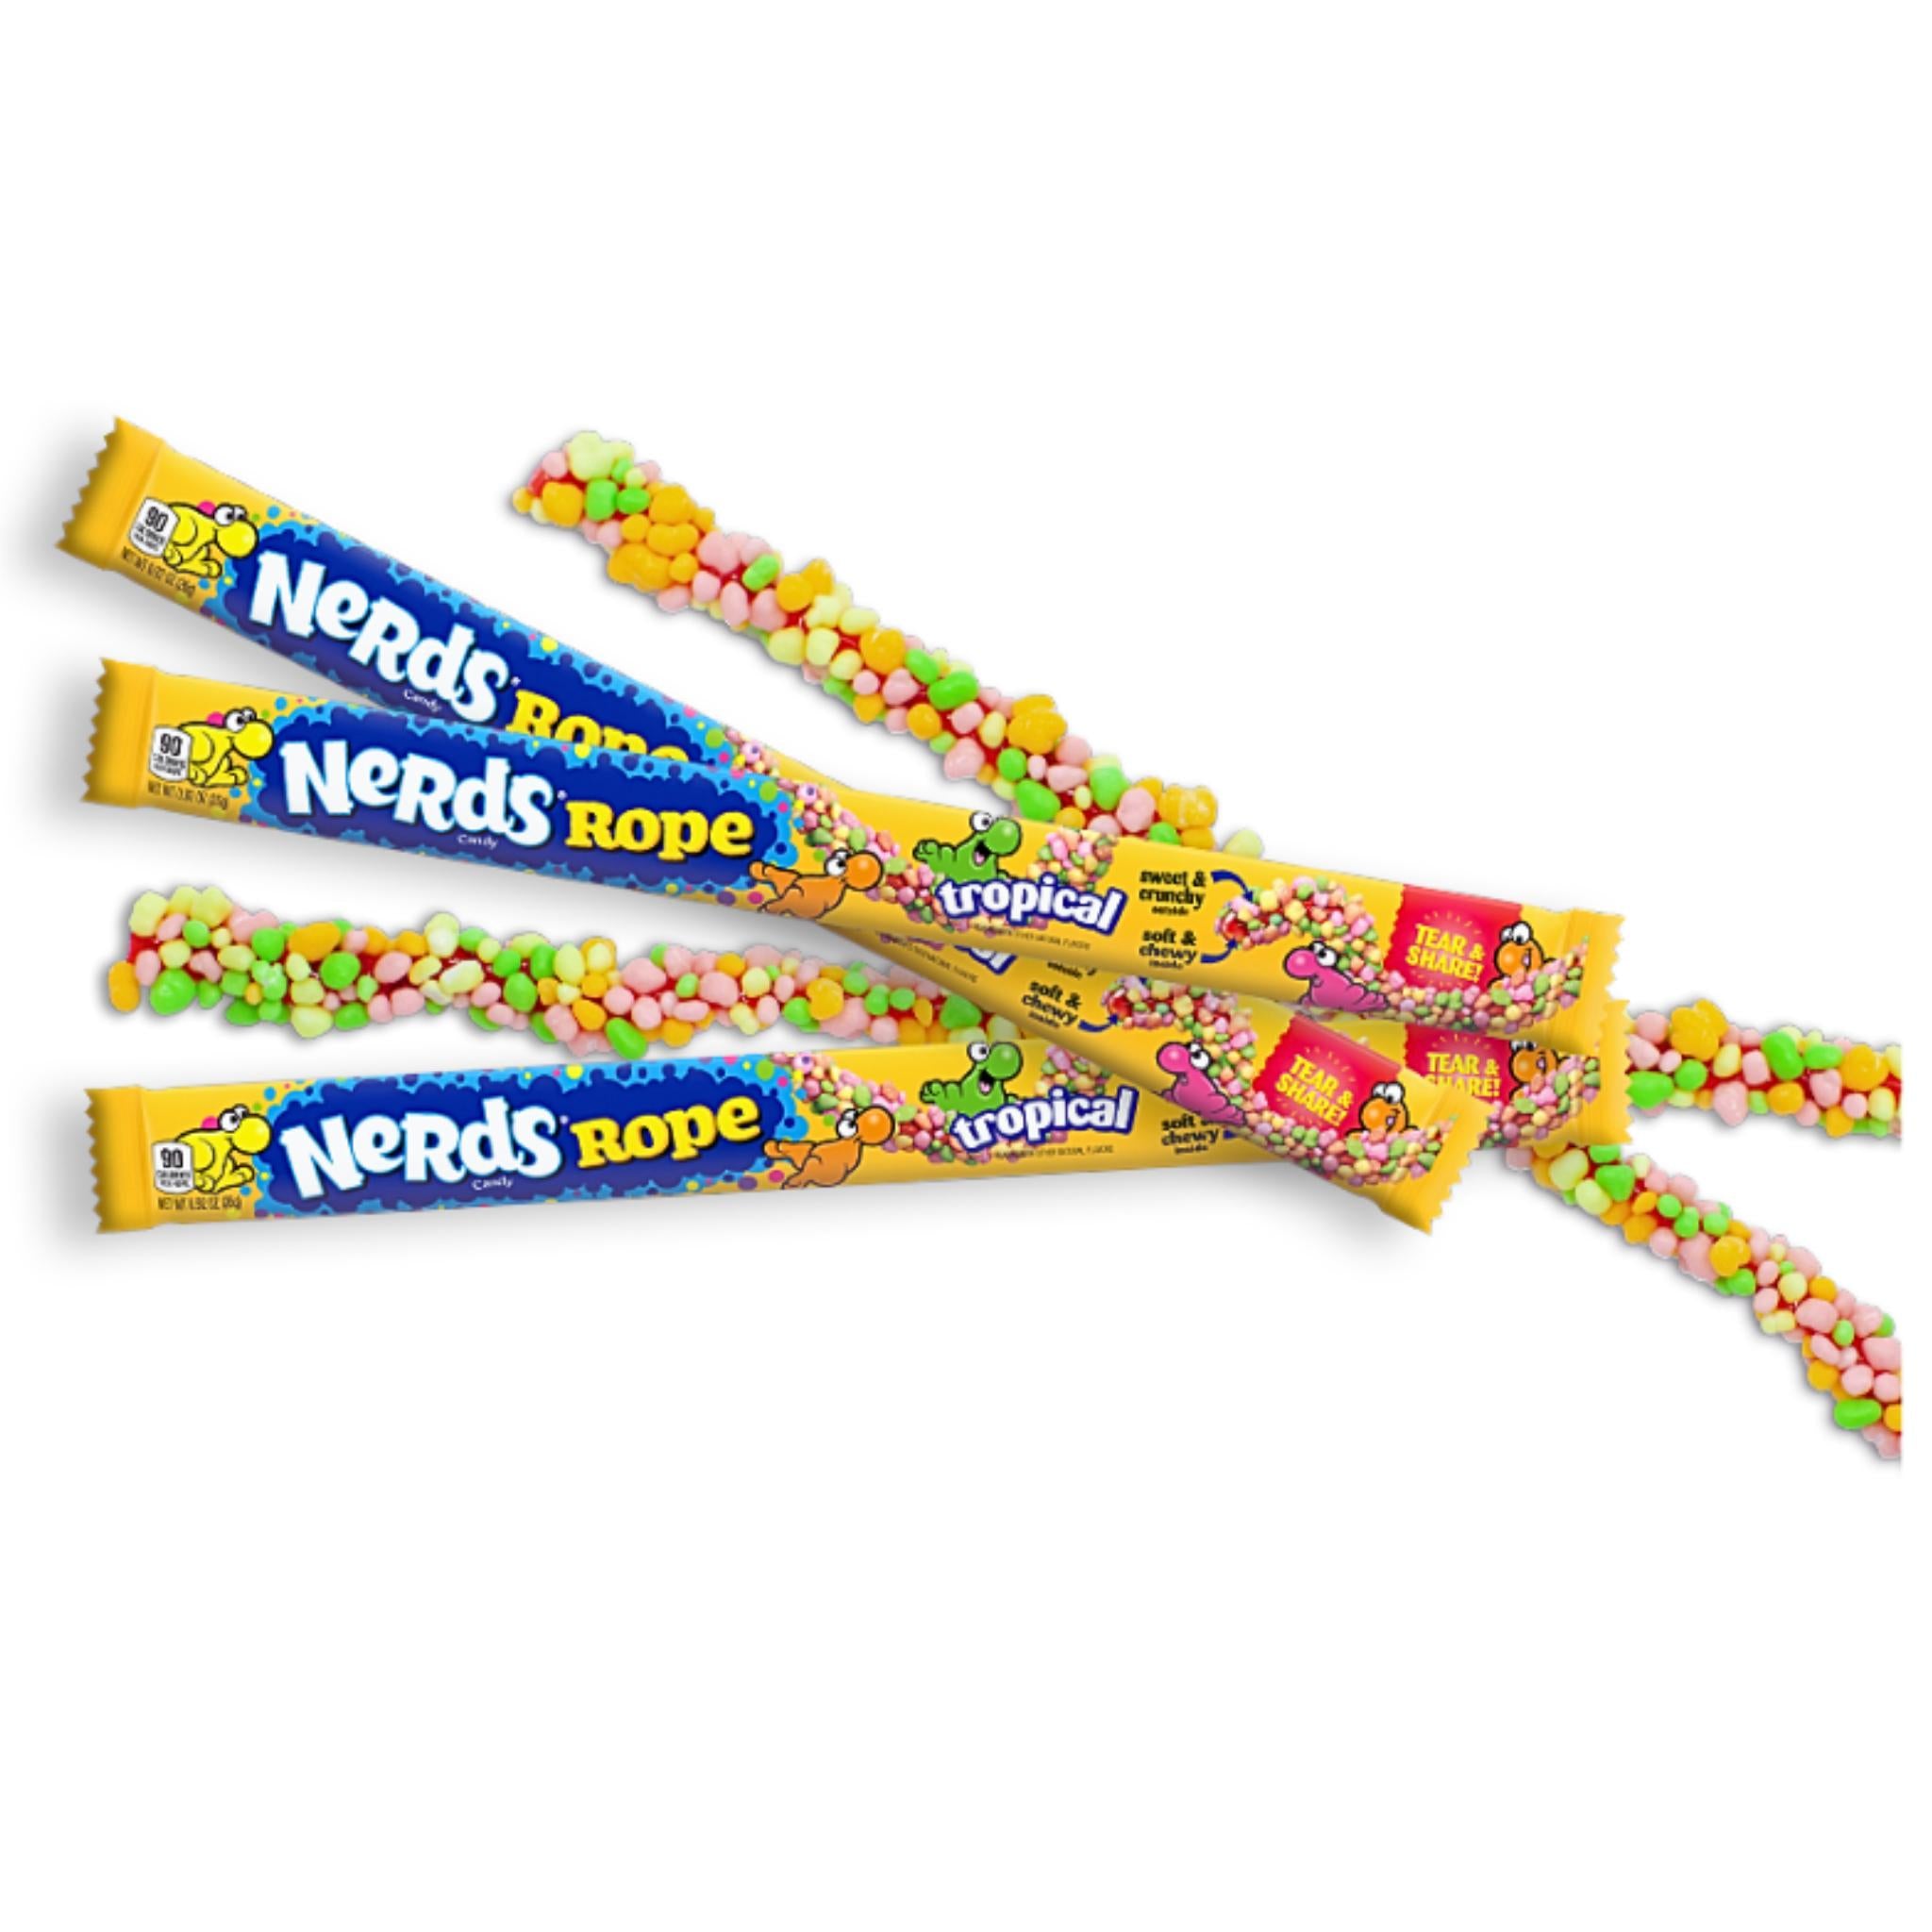 Nerds Rope Tropical - 26g (best before: 10-23)